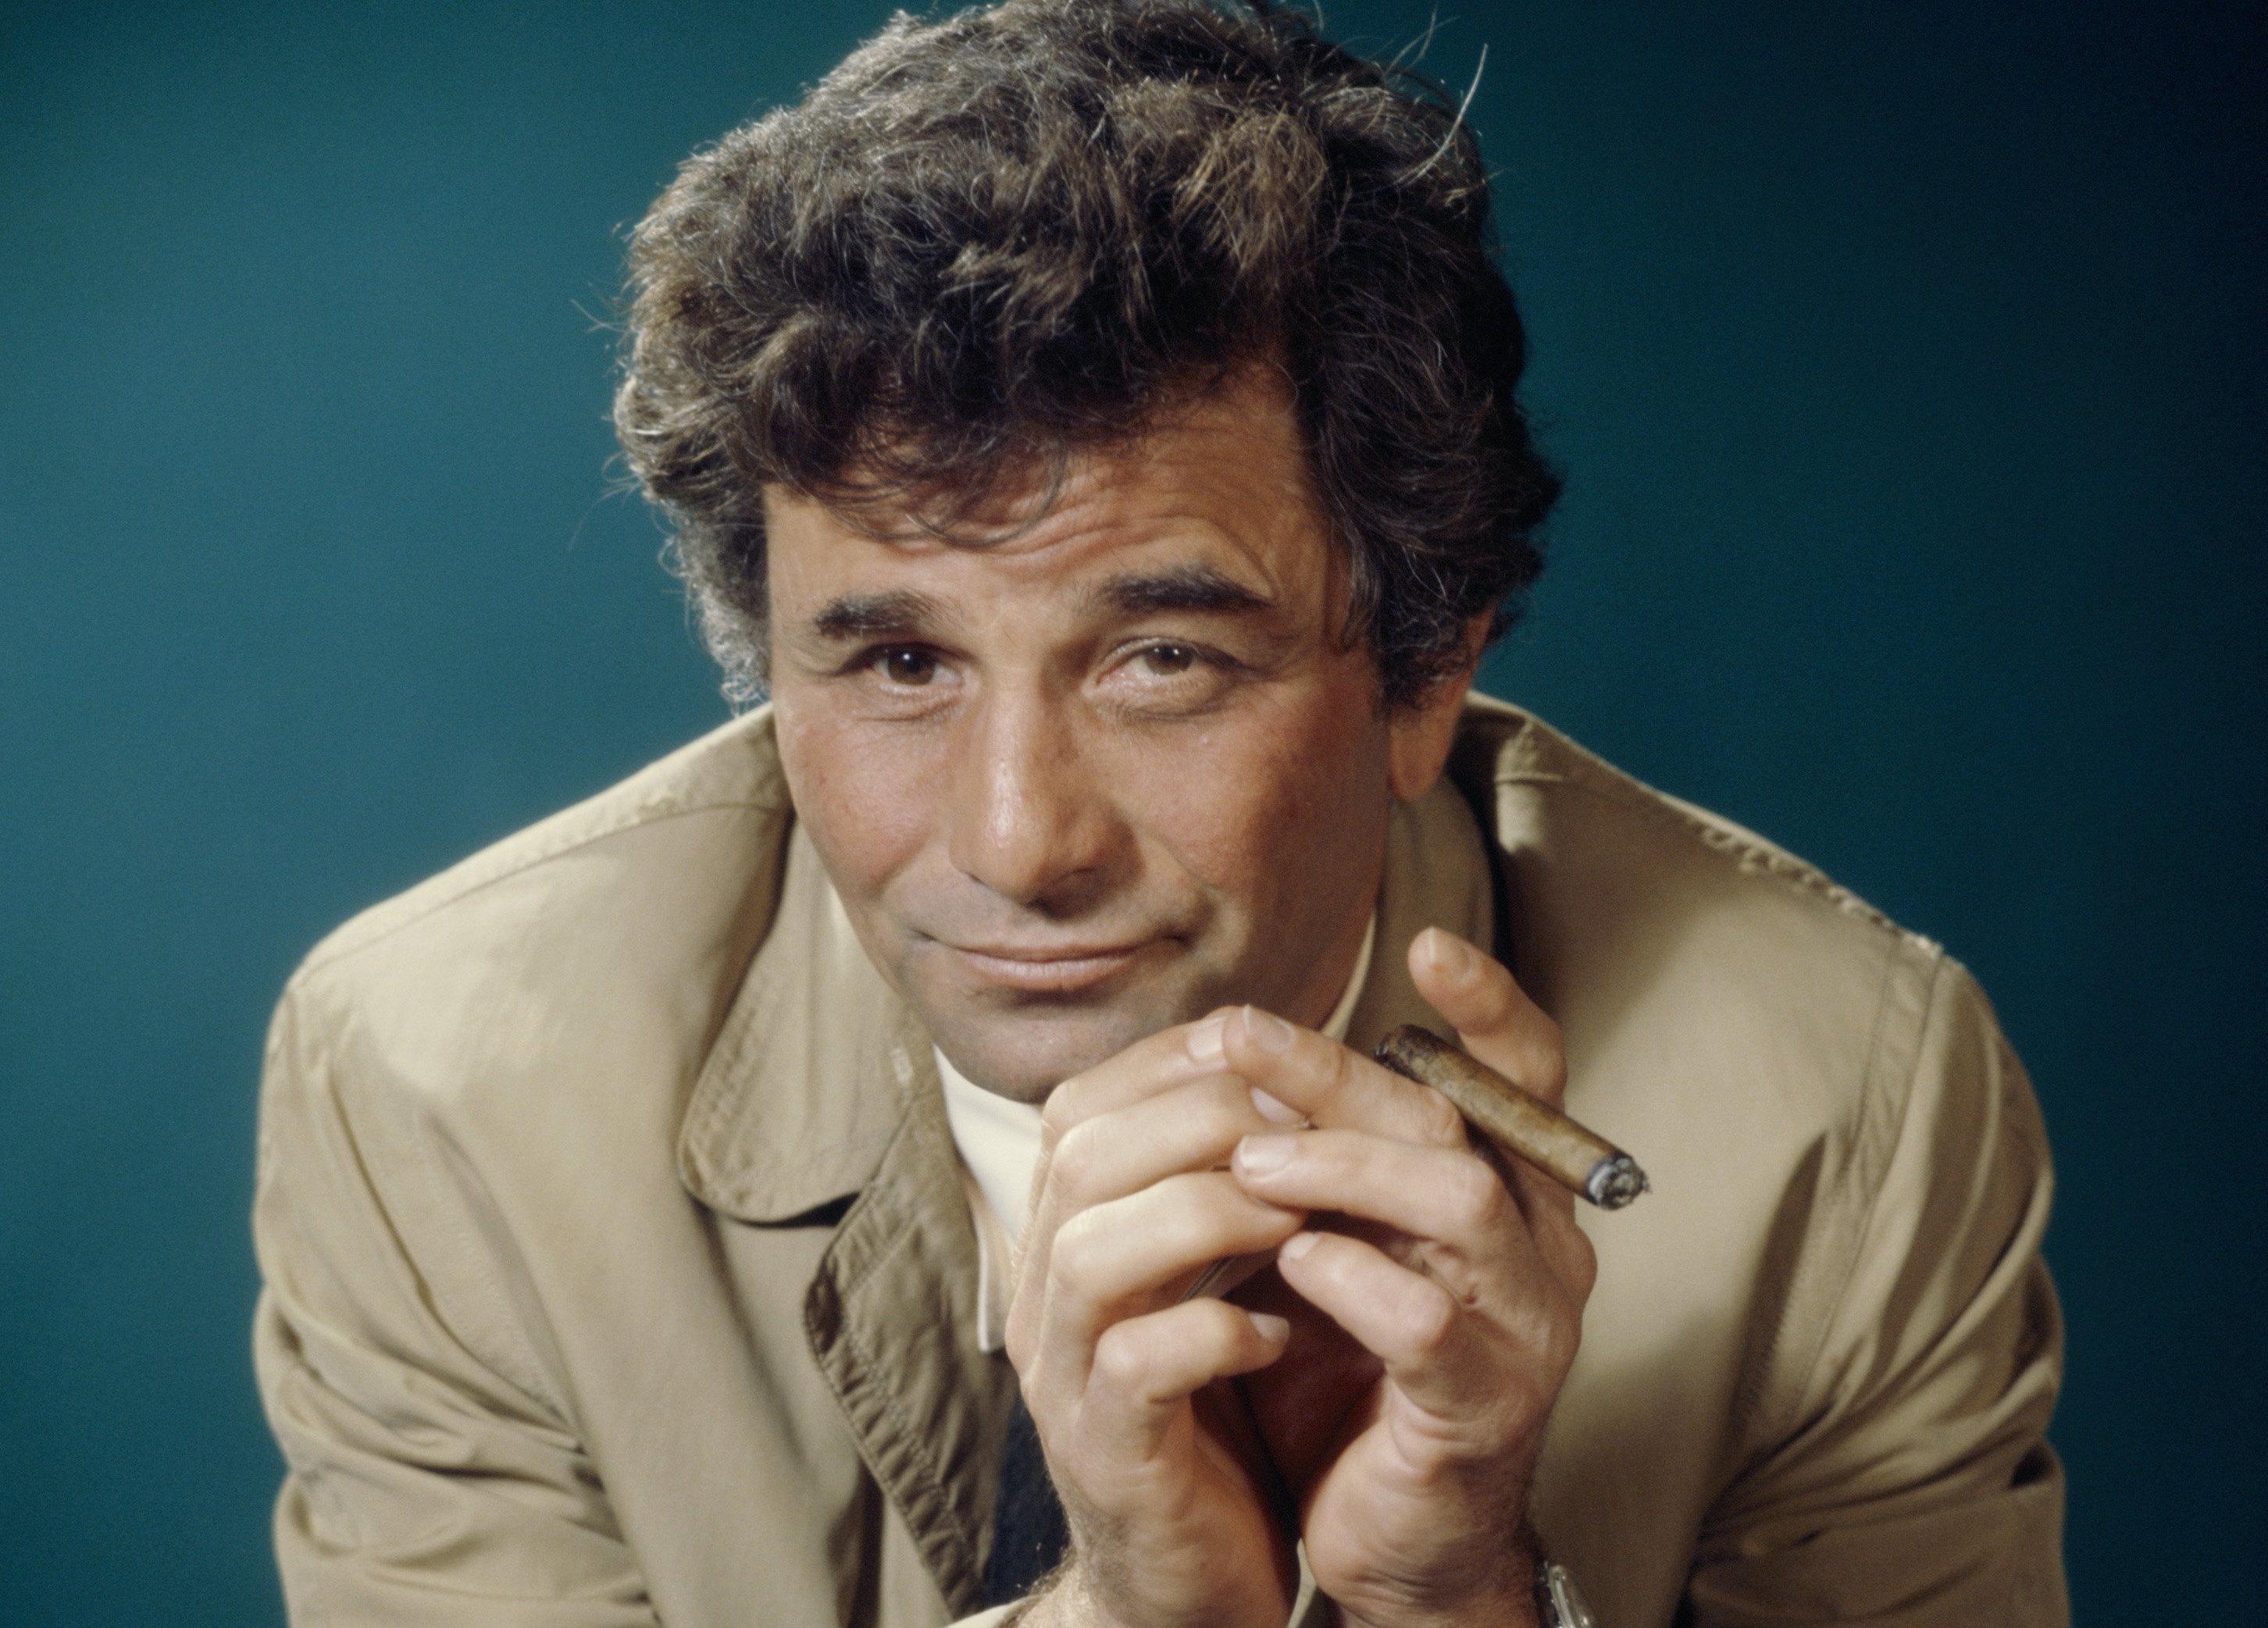 Columbo (Movie): The eponymous main character, Peter Falk, An American detective crime drama, Richard Levinson and William Link. 2910x2090 HD Background.